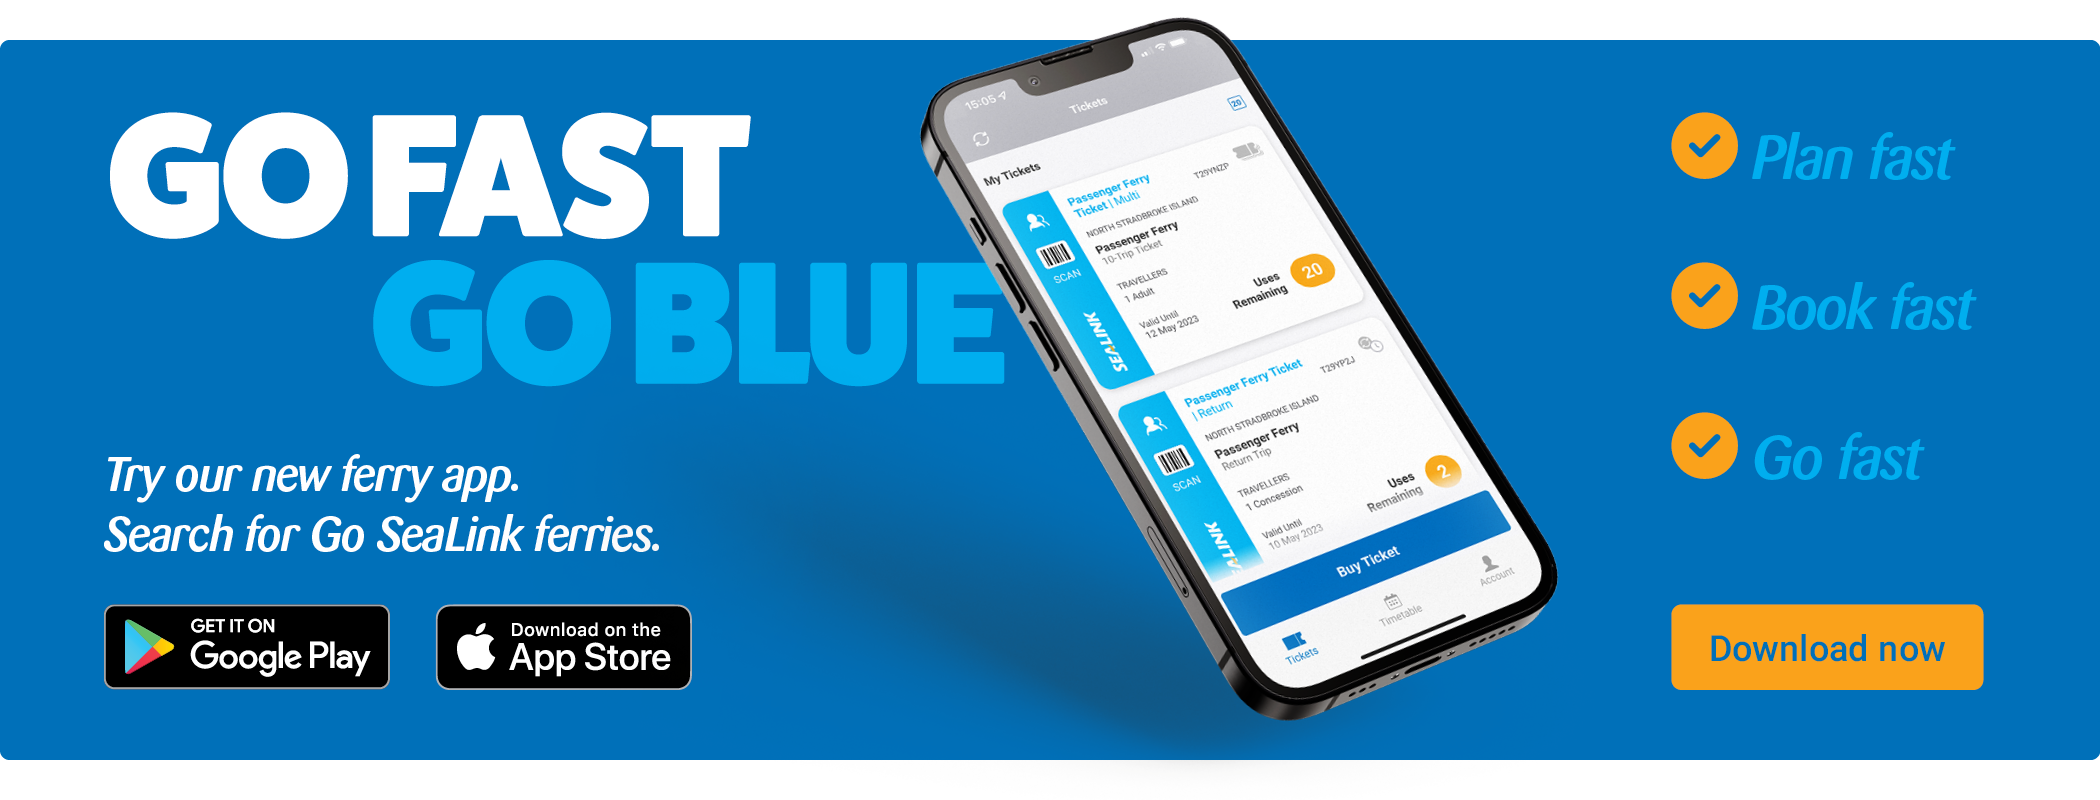 Go Fast Go Blue - Try our new commuter ferry app.